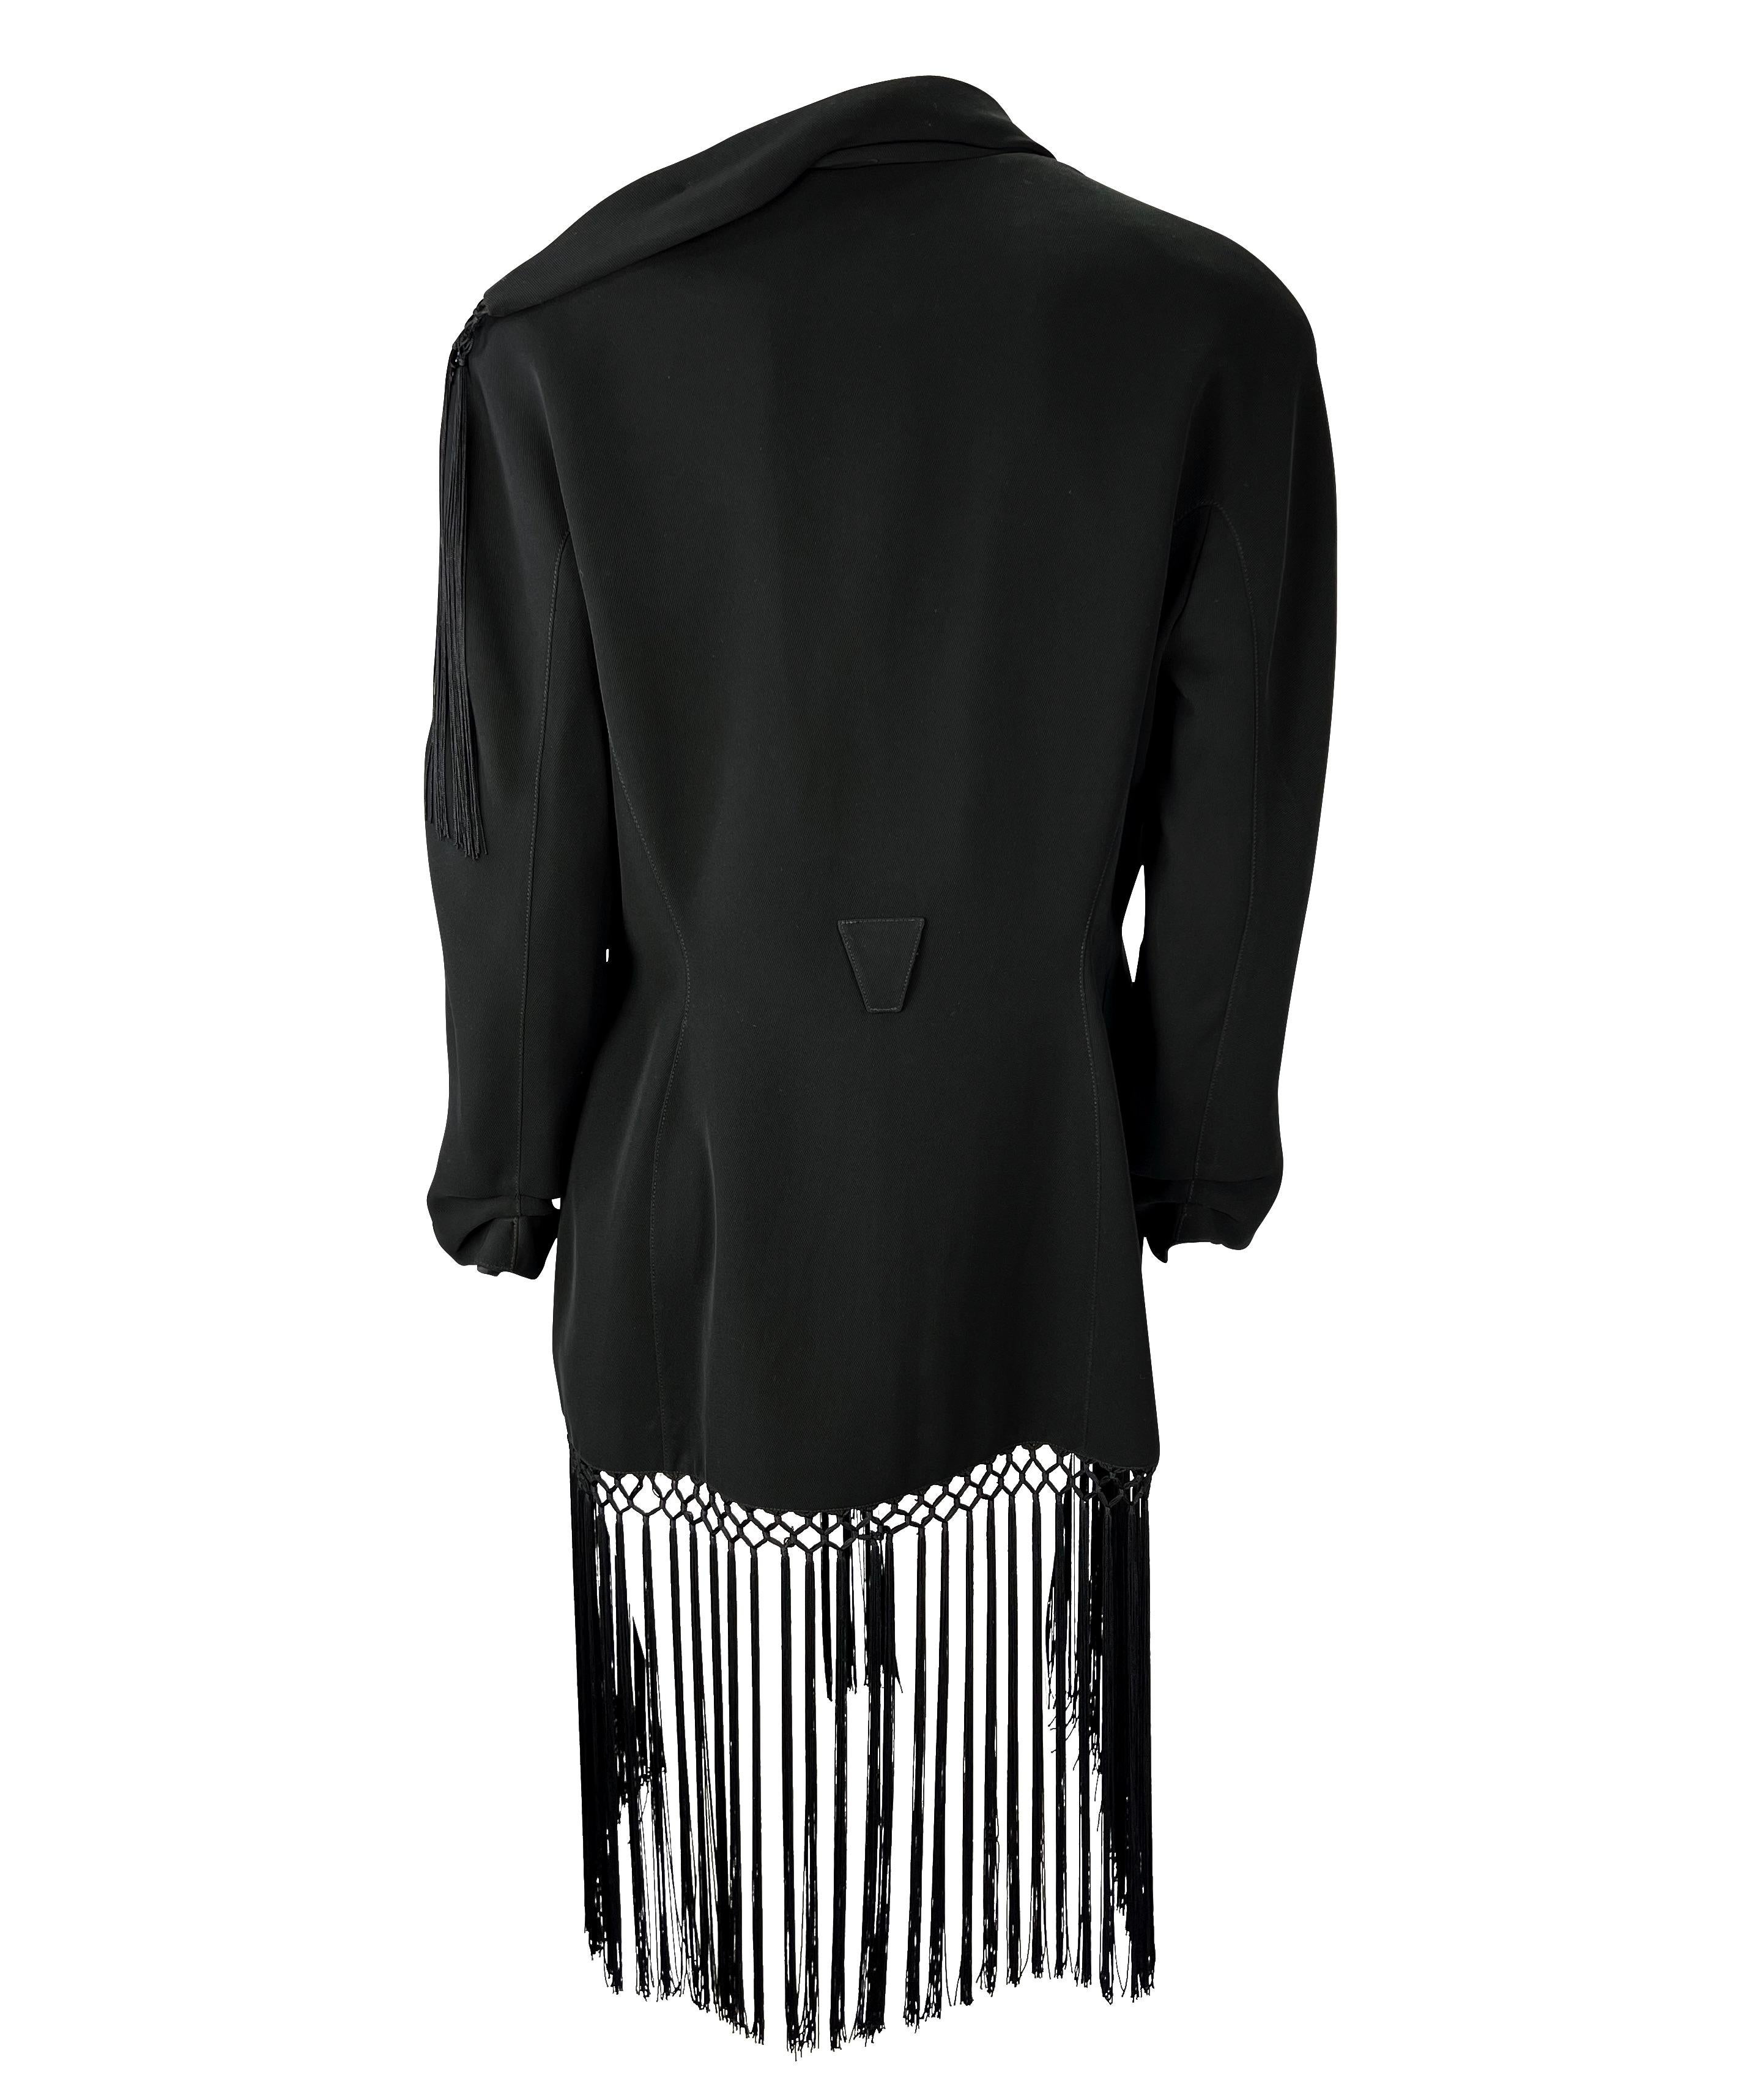 S/S 1997 Thierry Mugler Couture 'Les Insectes' Black Fringe Tassel Blazer  For Sale 4